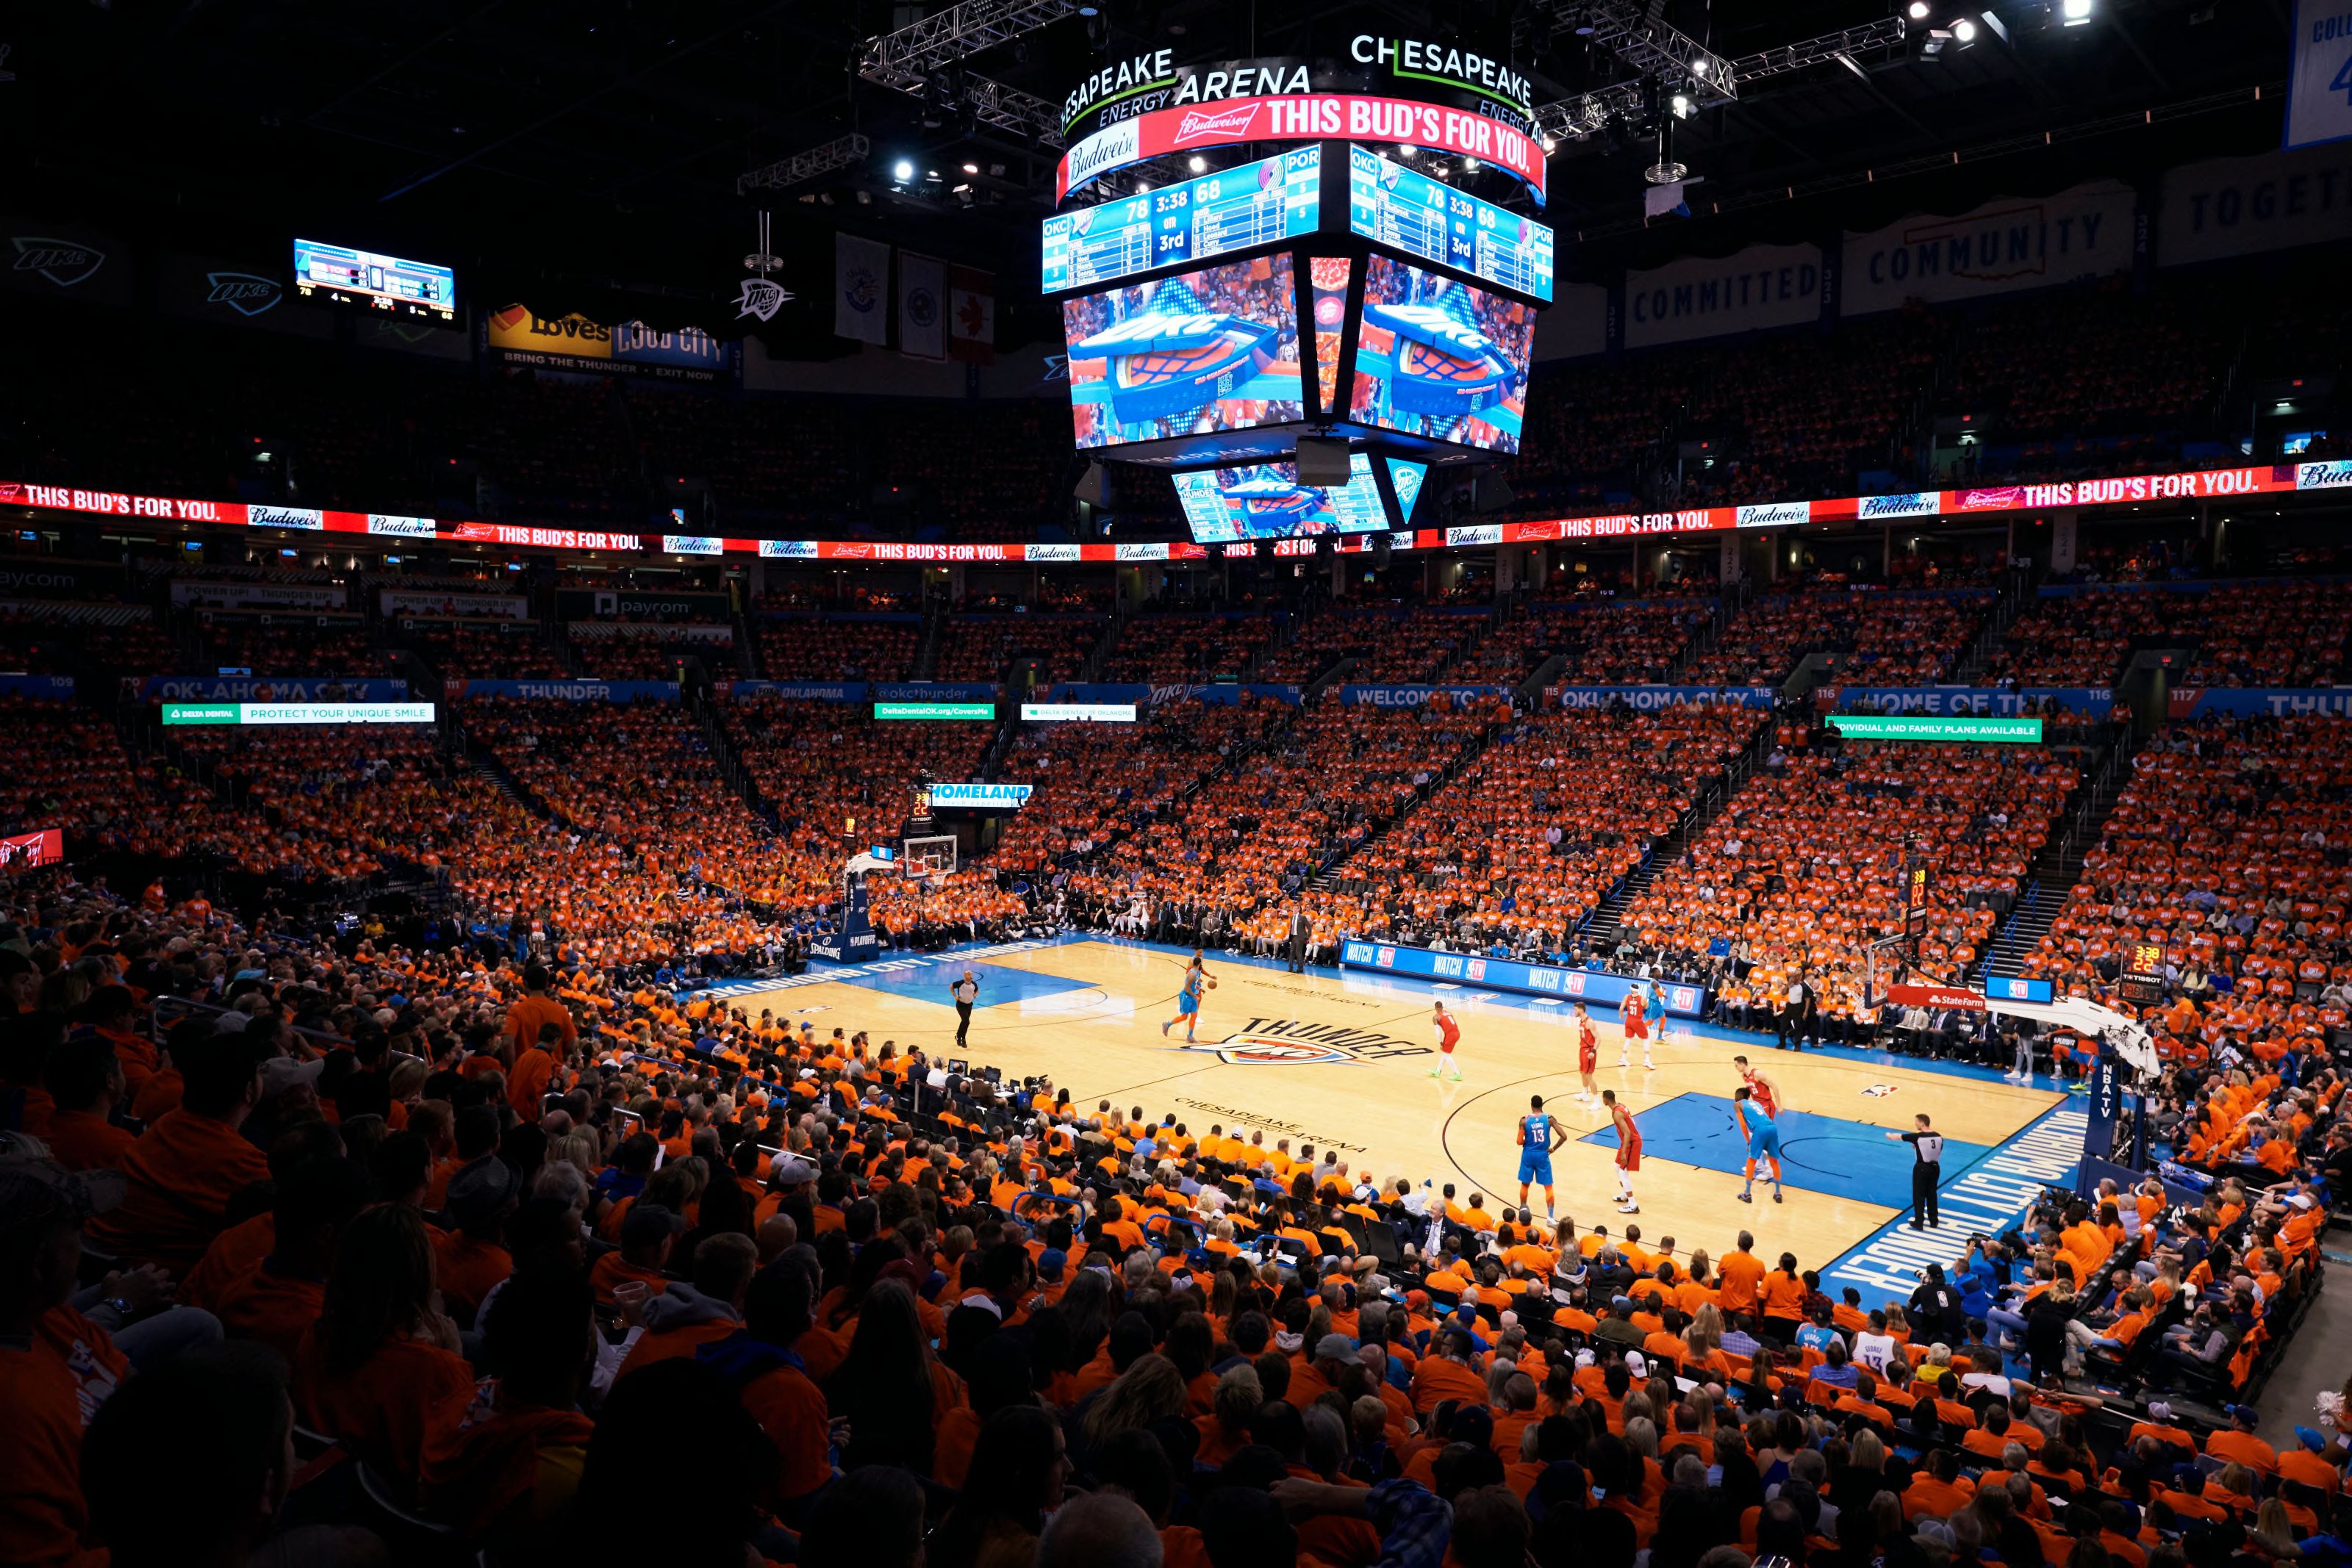 OKC Thunder A flyover state, and their date with NBA History